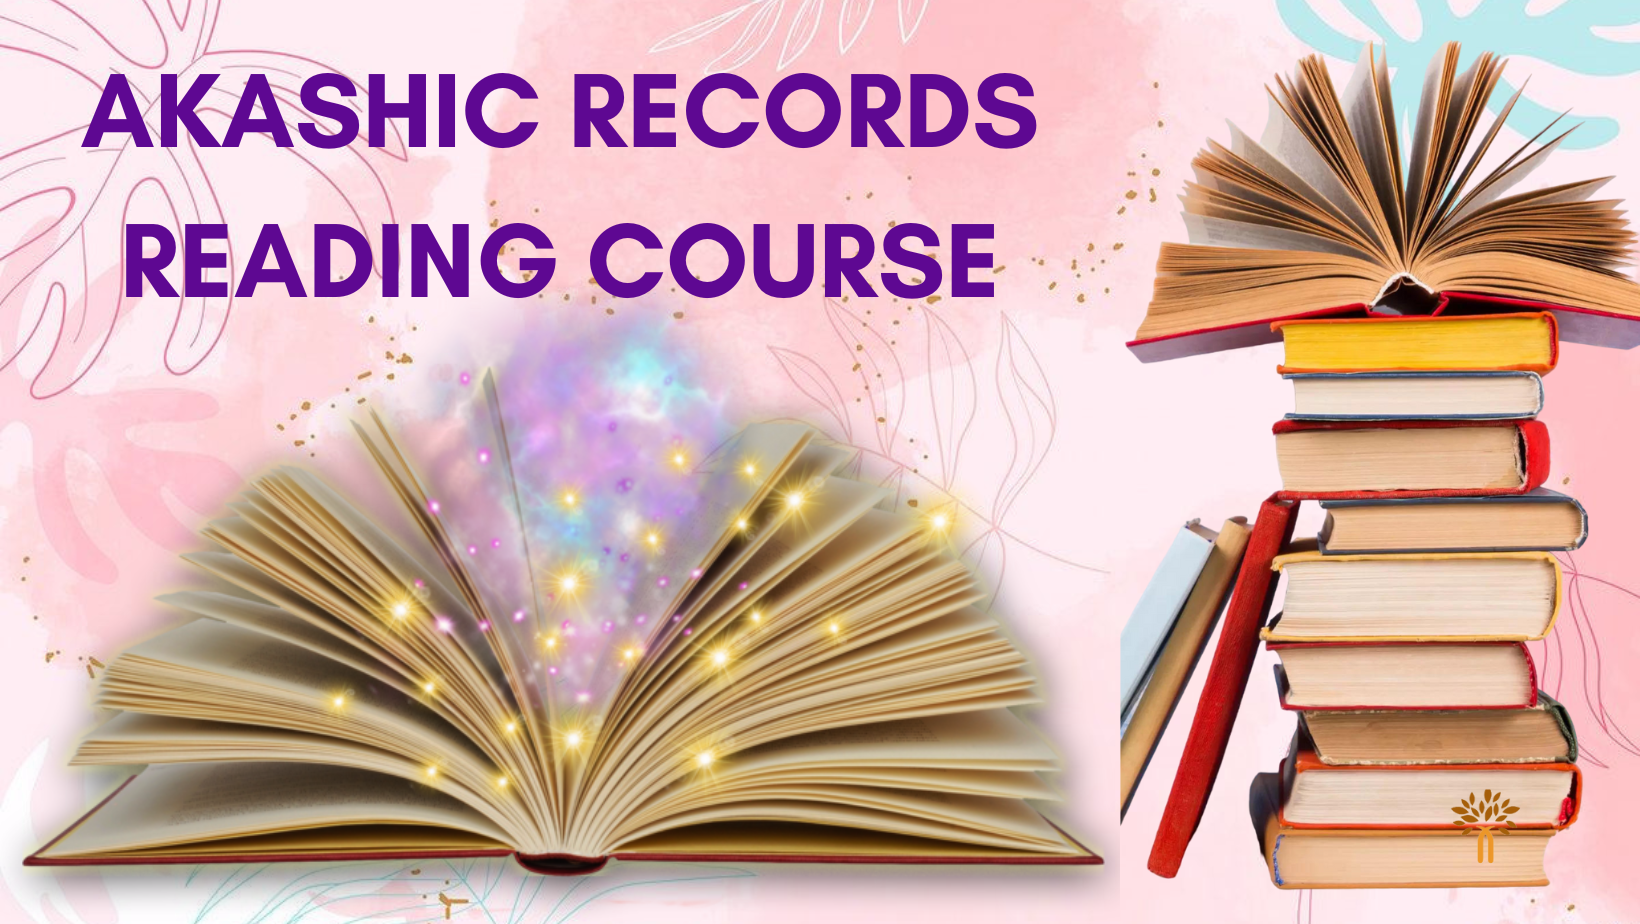 Akashic Records Reading Course in Chandigarh